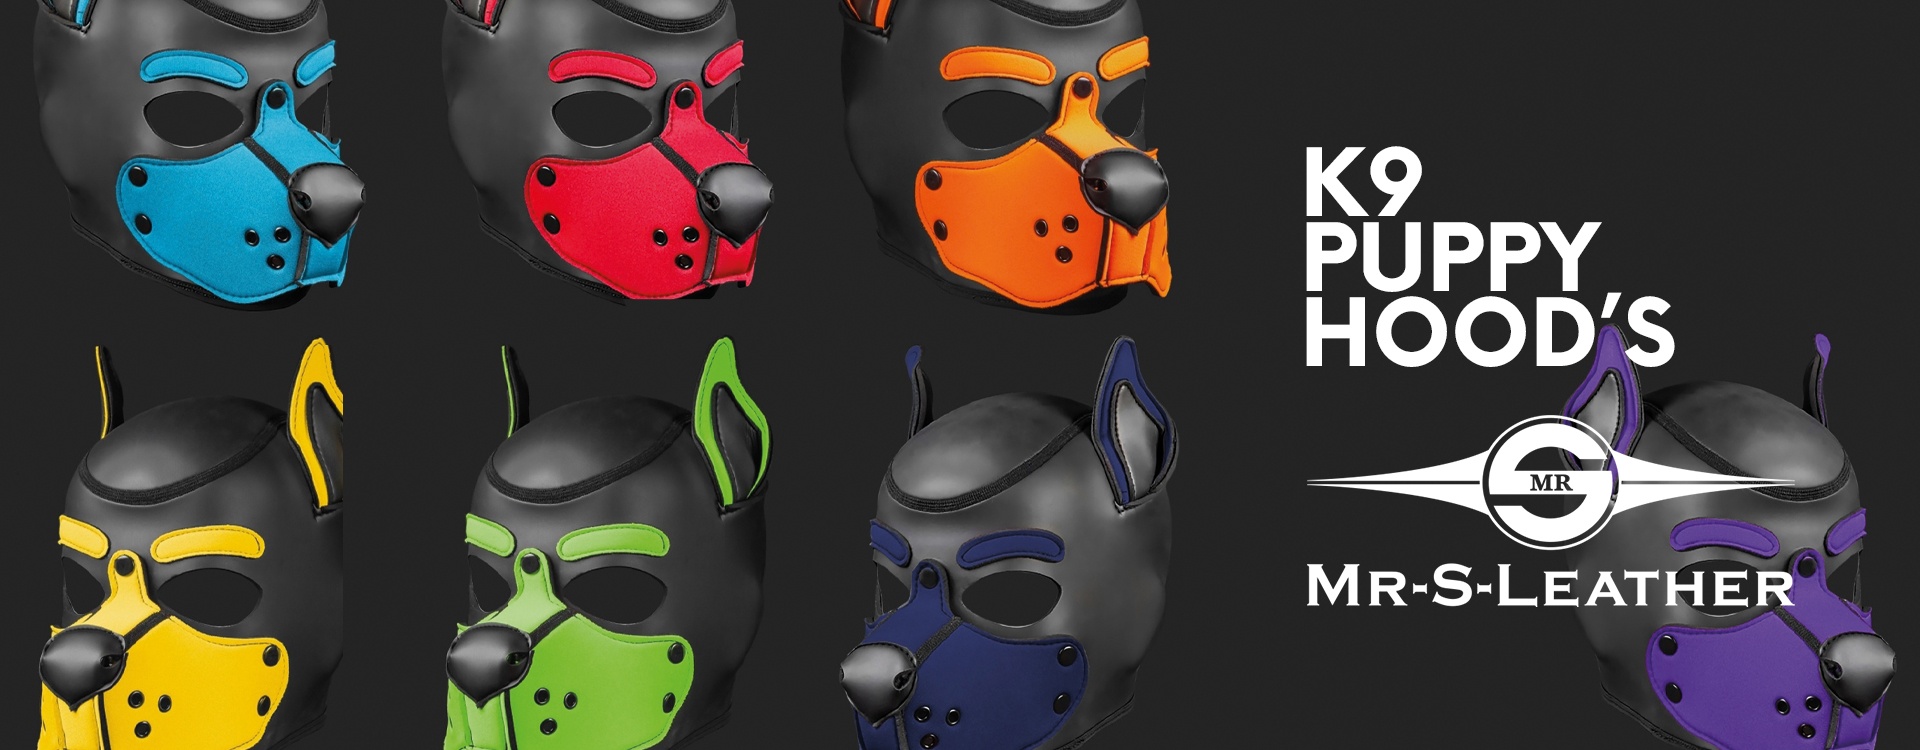 K9 the Fetish Puppy Hood by Mr. S Leather